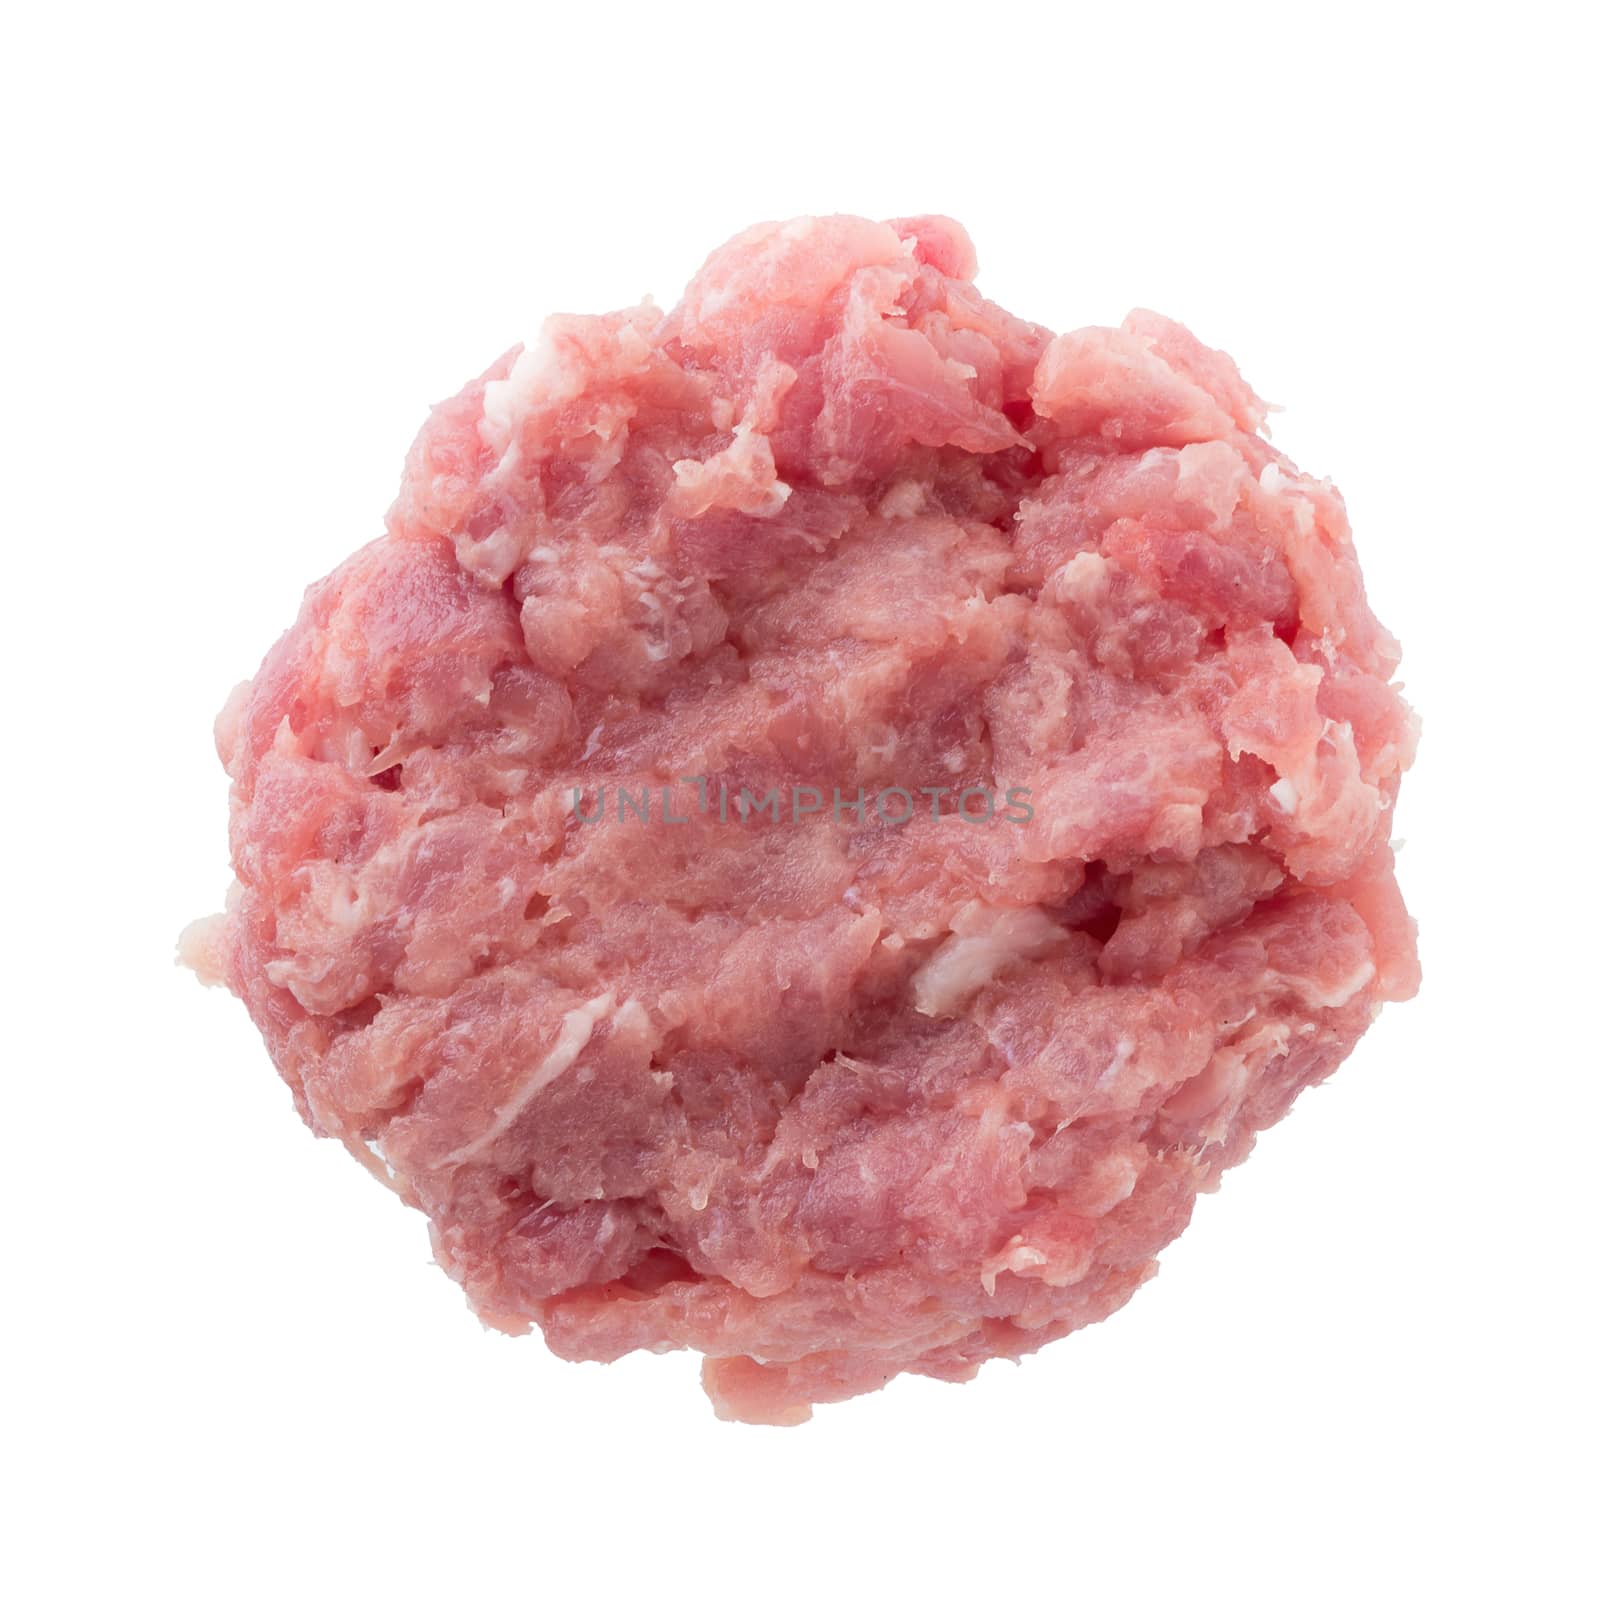 minced pork isolated on a white background.